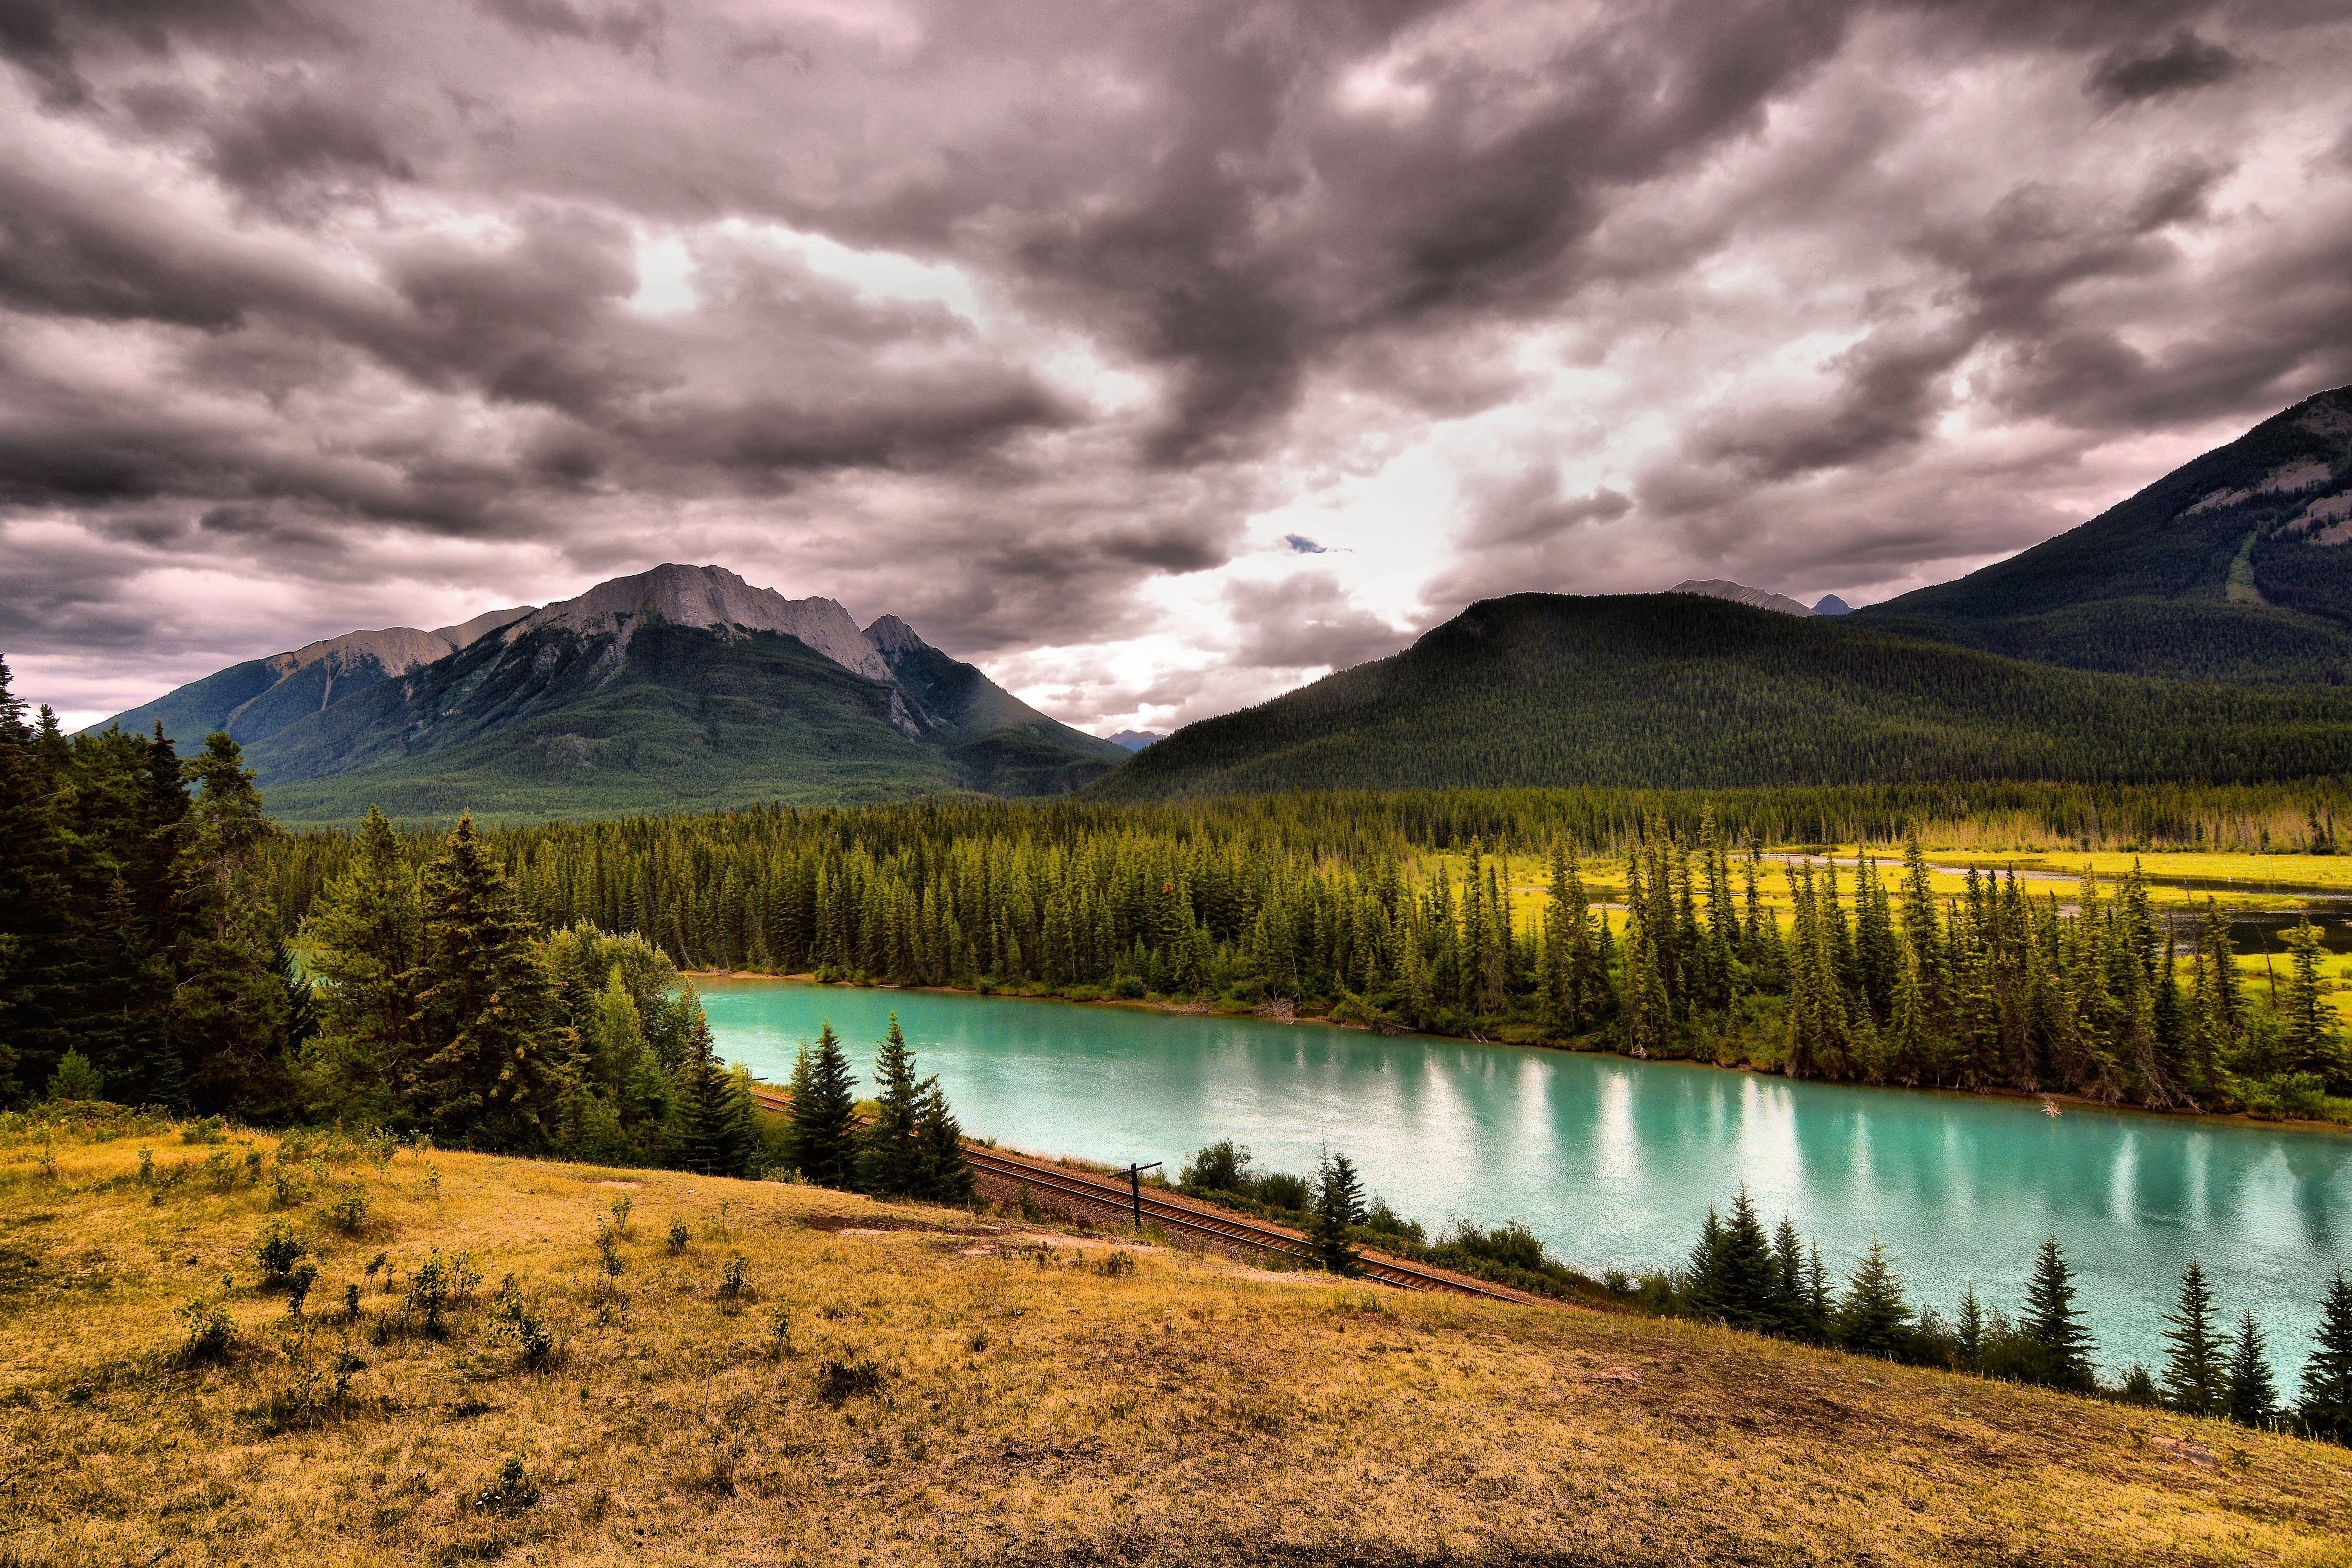 Wallpapers Banff national park Canadian Rockies Alberta Bow River on the desktop